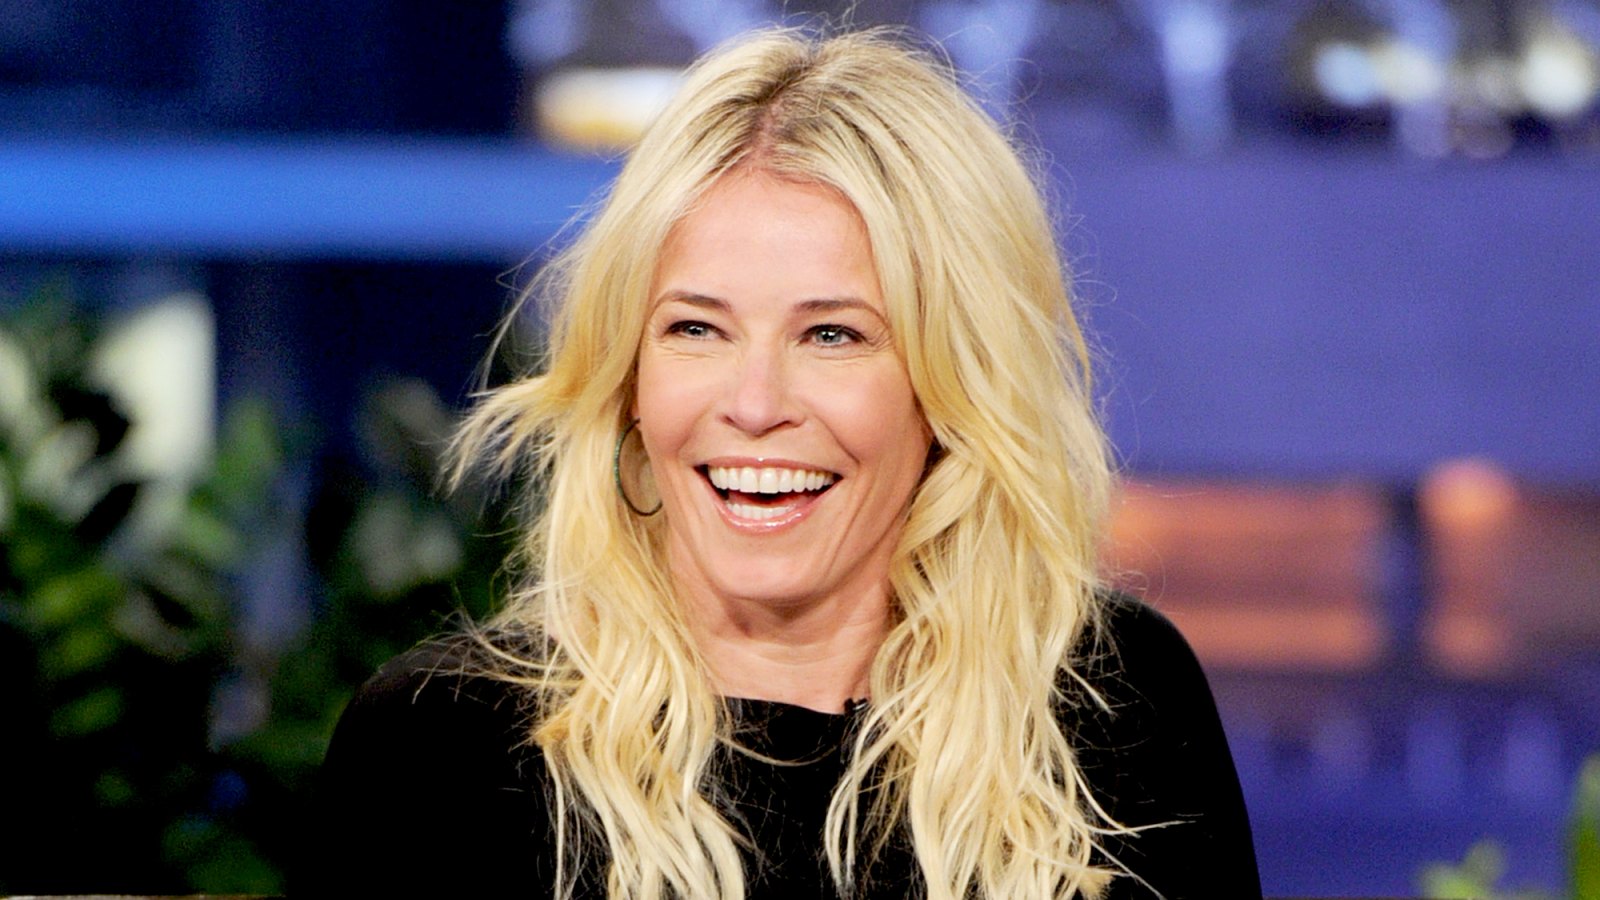 Chelsea Handler appears on the Tonight Show With Jay Leno at NBC Studios on February 7, 2012 in Burbank, California.